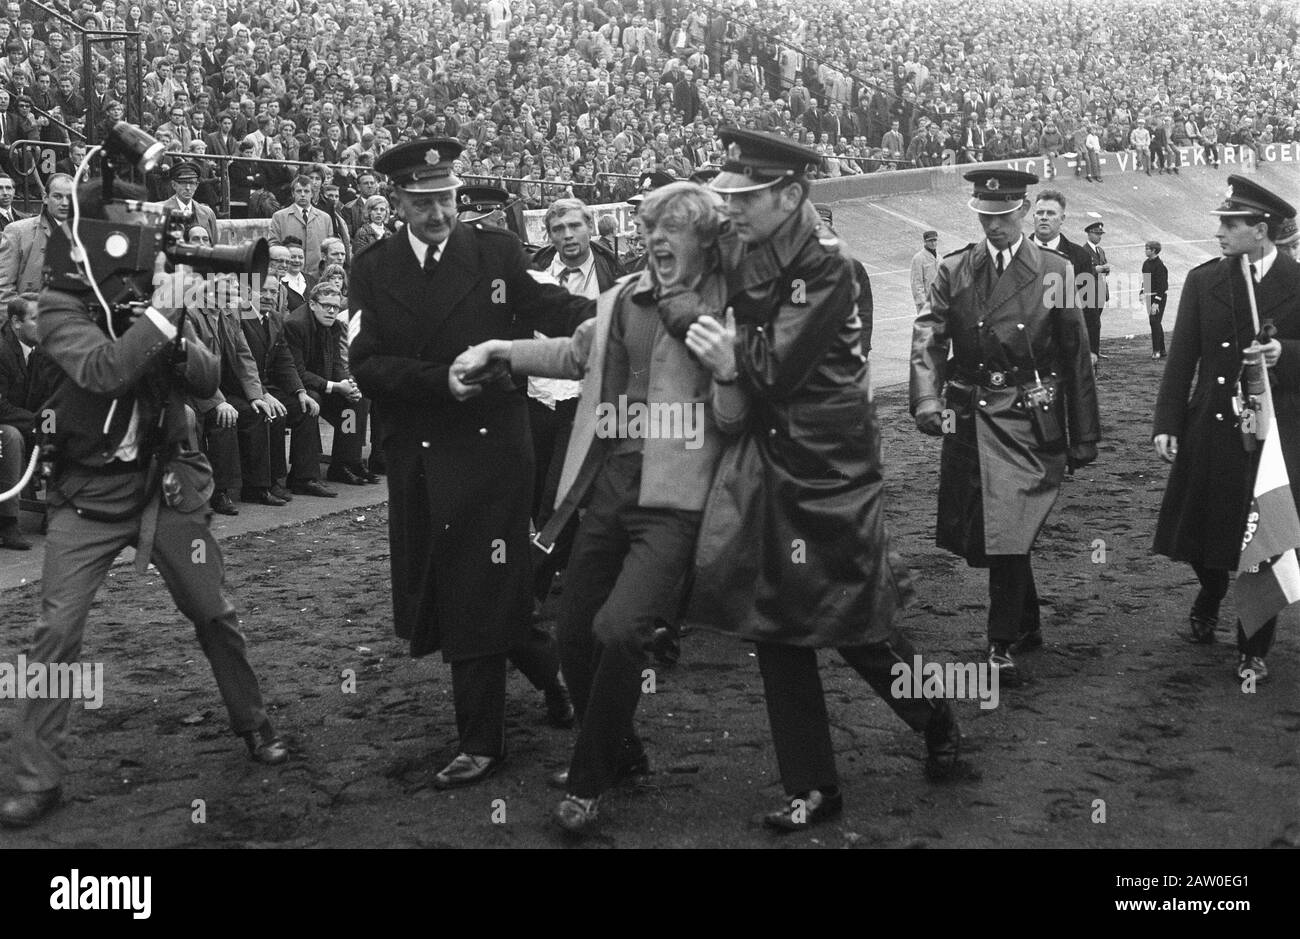 NEC v Feyenoord 0-2. Police officers remove supporter Date: October 26, 1969 Keywords: POLICEMEN, sports, fans, football Institution Name: Feyenoord Stock Photo